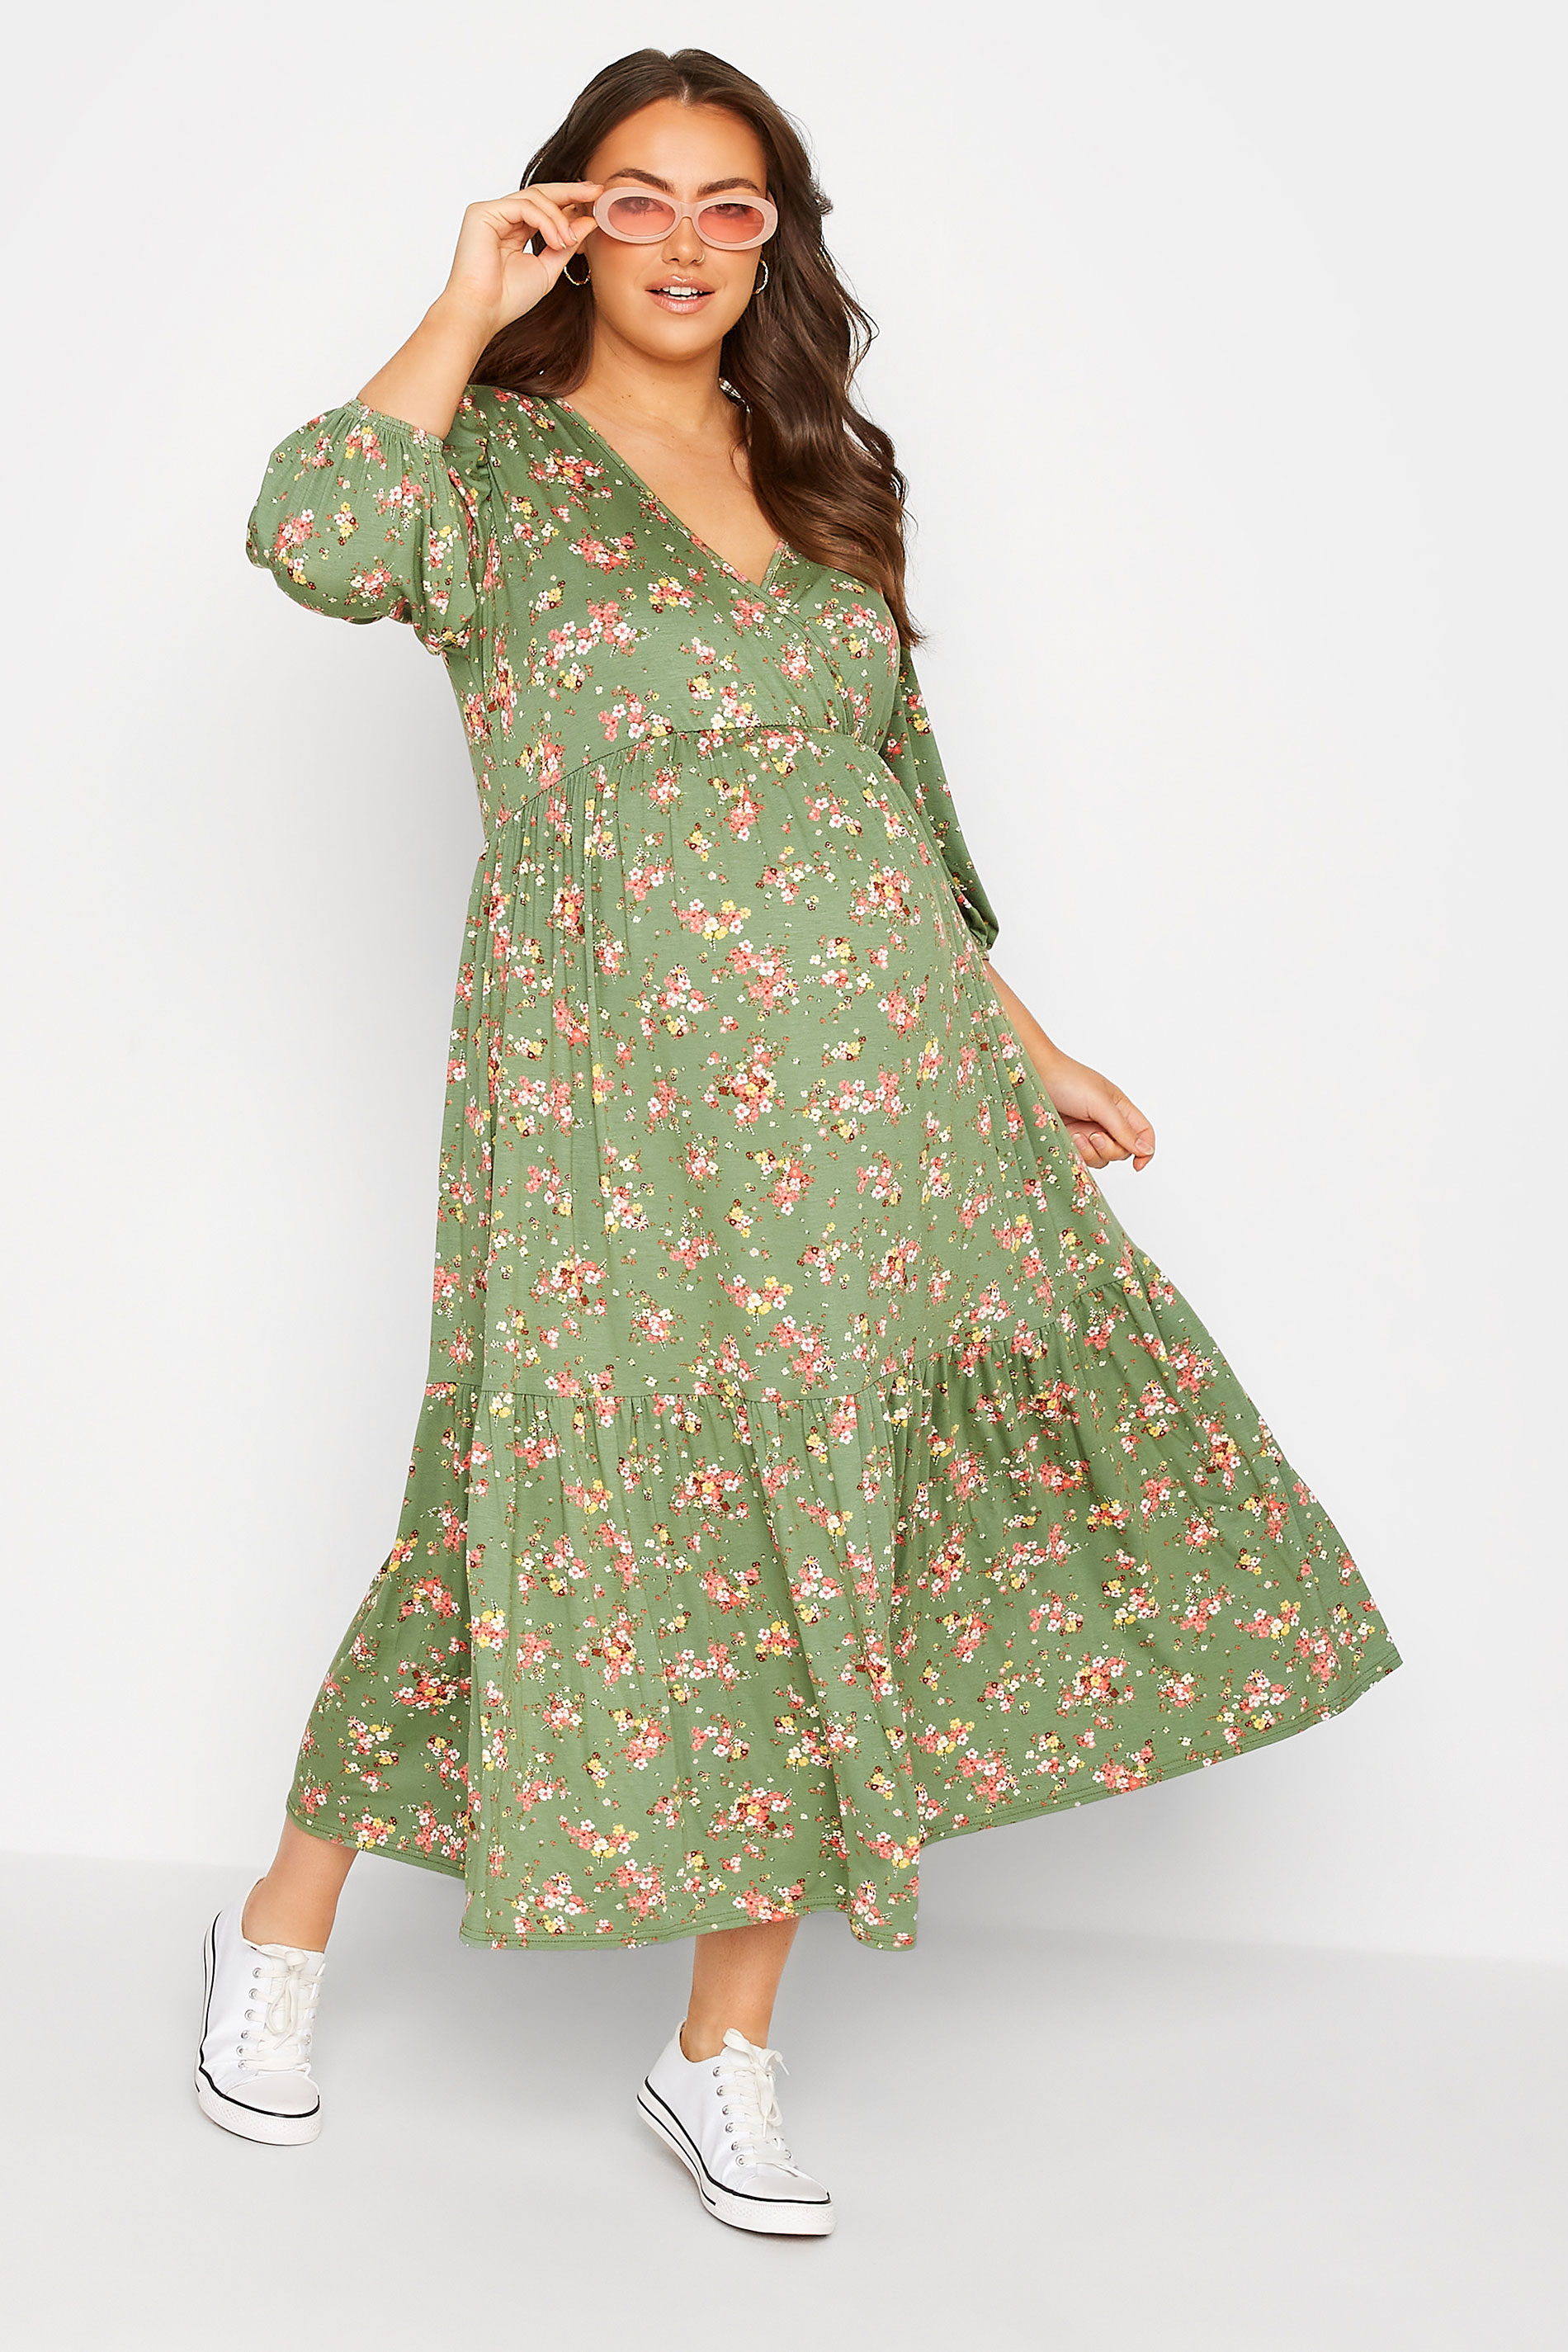 BUMP IT UP MATERNITY Plus Size Green Floral Print Tiered Wrap Dress | Yours Clothing  1